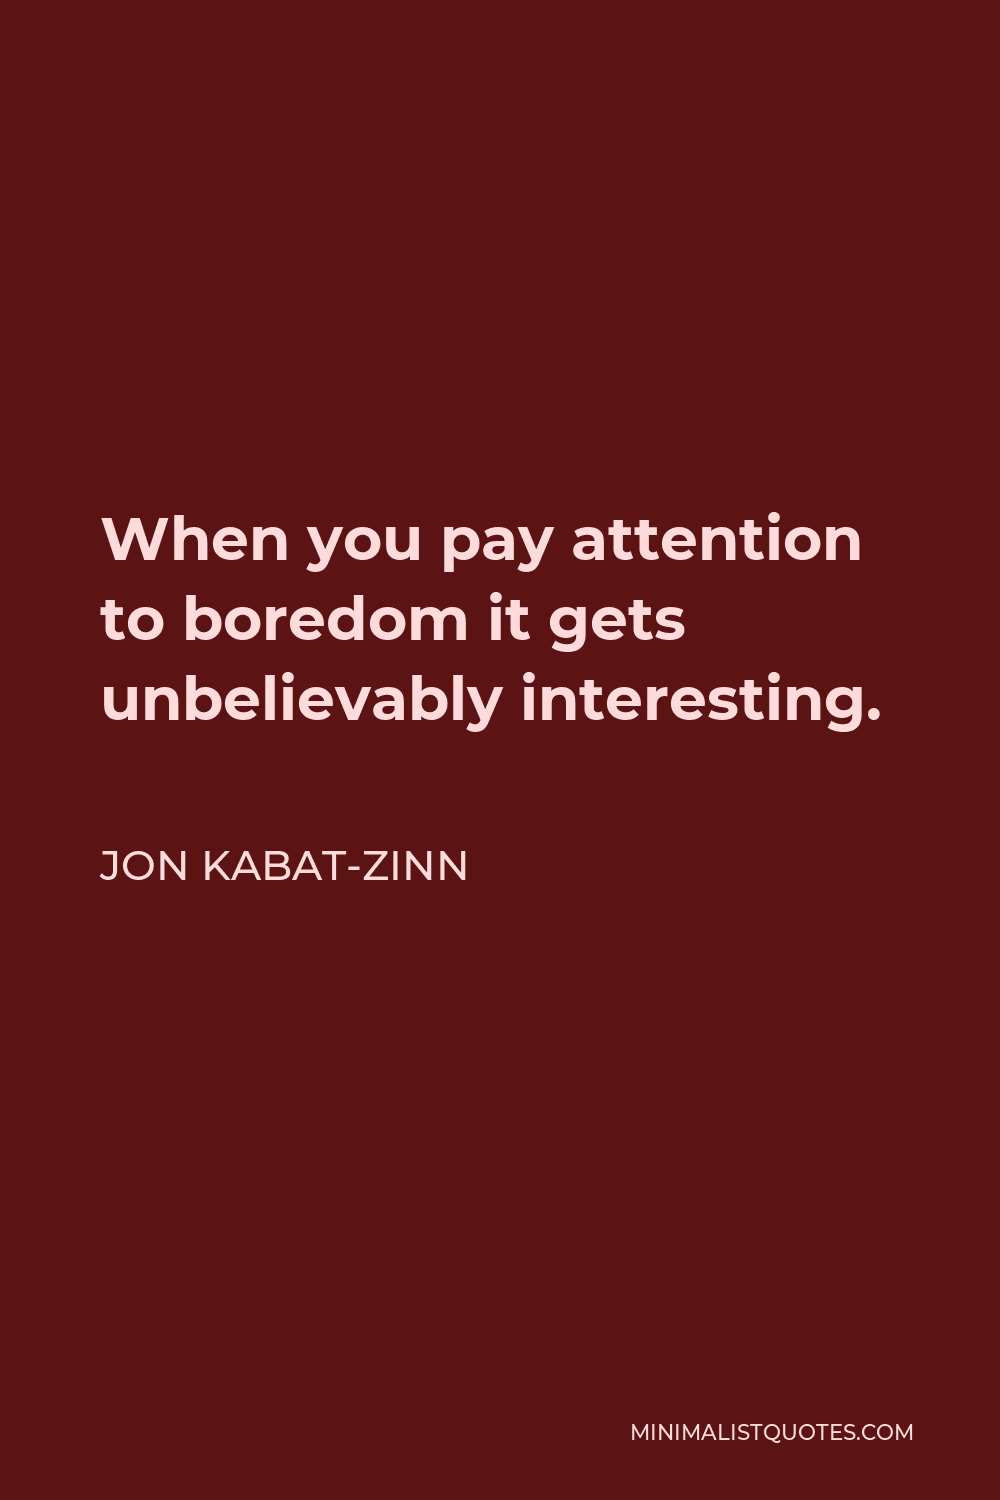 Jon Kabat-Zinn Quote - When you pay attention to boredom it gets unbelievably interesting.